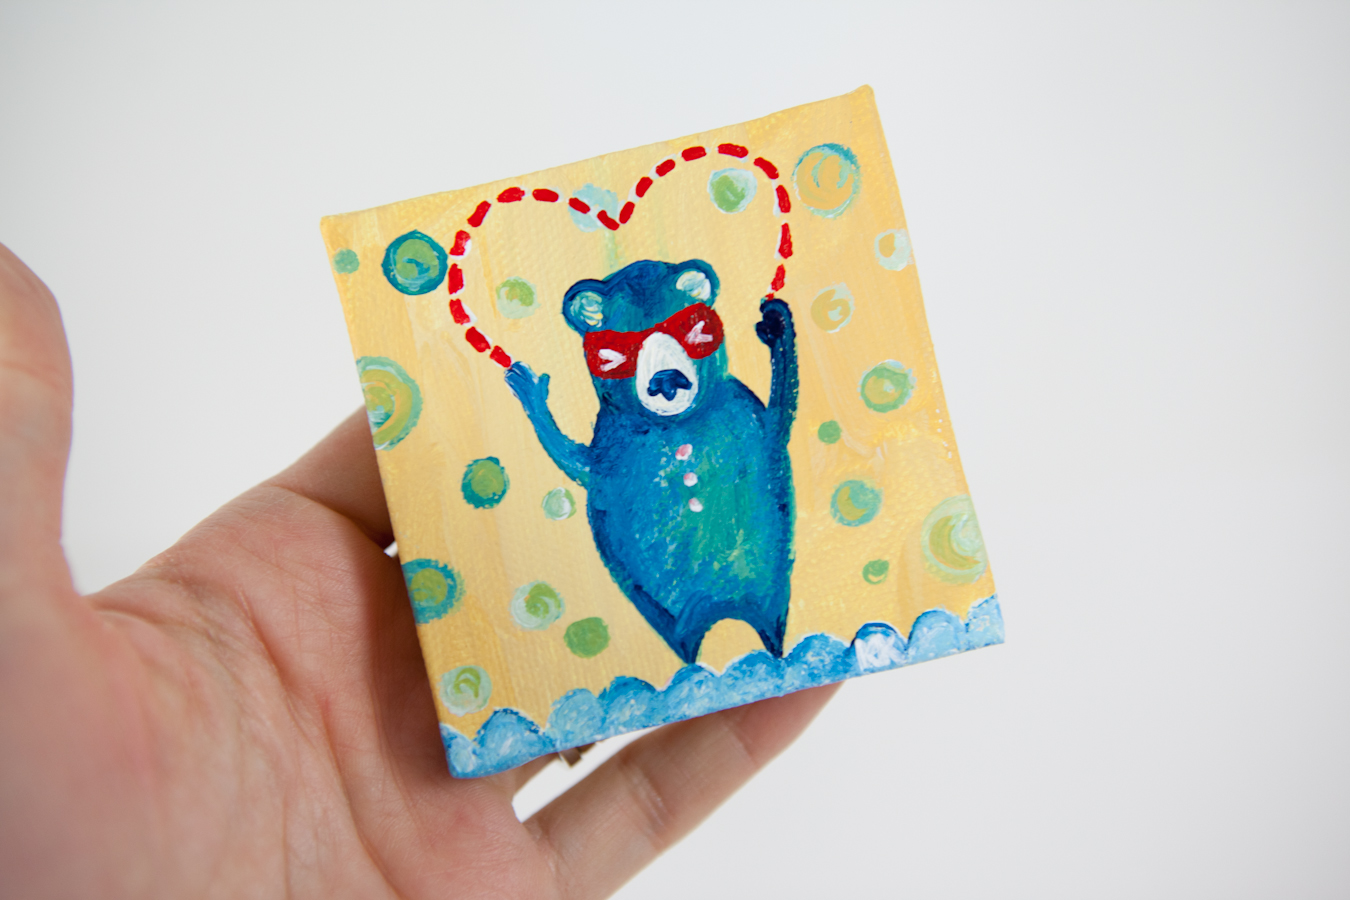 Bear Valentine Art, Miniature Painting, Whimsical Small Art, Red Heart, Yellow and Blue - Original Mini Painting by Kimberly Kling